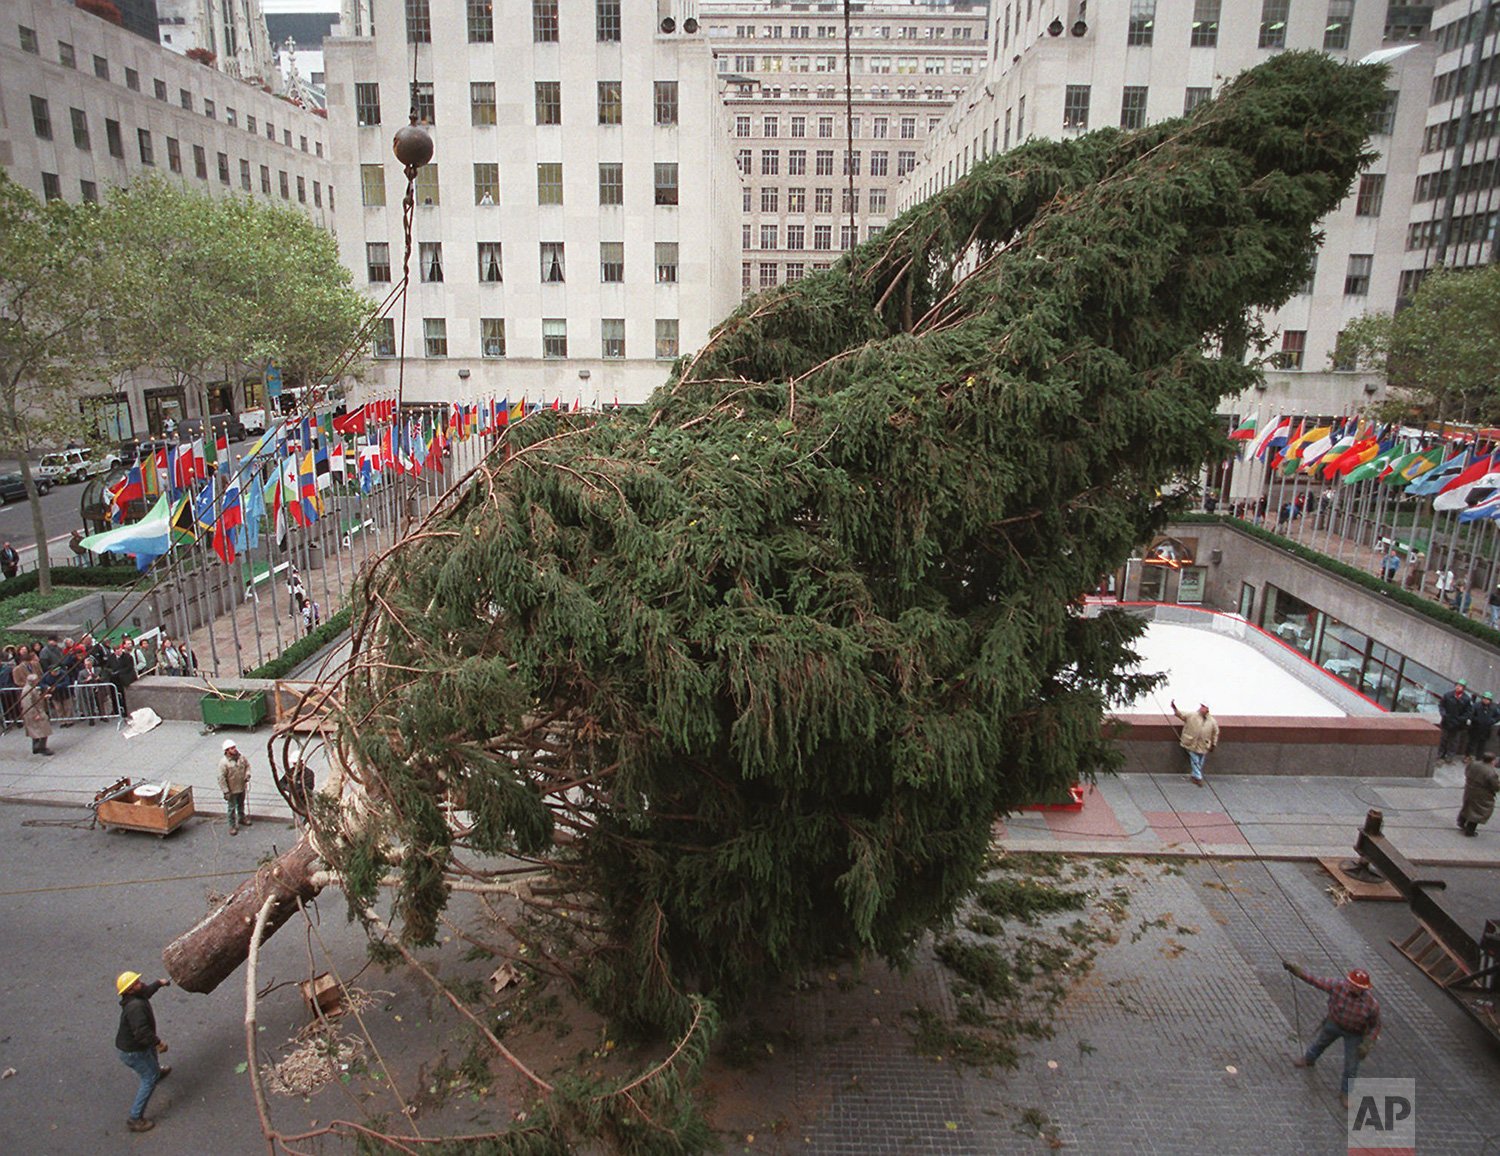  Workers maneuver the Rockefeller Center Christmas tree onto it's pedestal above the ice skating rink in New York, Wednesday, Nov. 15, 1995.  The 63-year-old, 75-foot Norway spruce was prayerfully sacrificed by the Sisters of Christian Charity conven